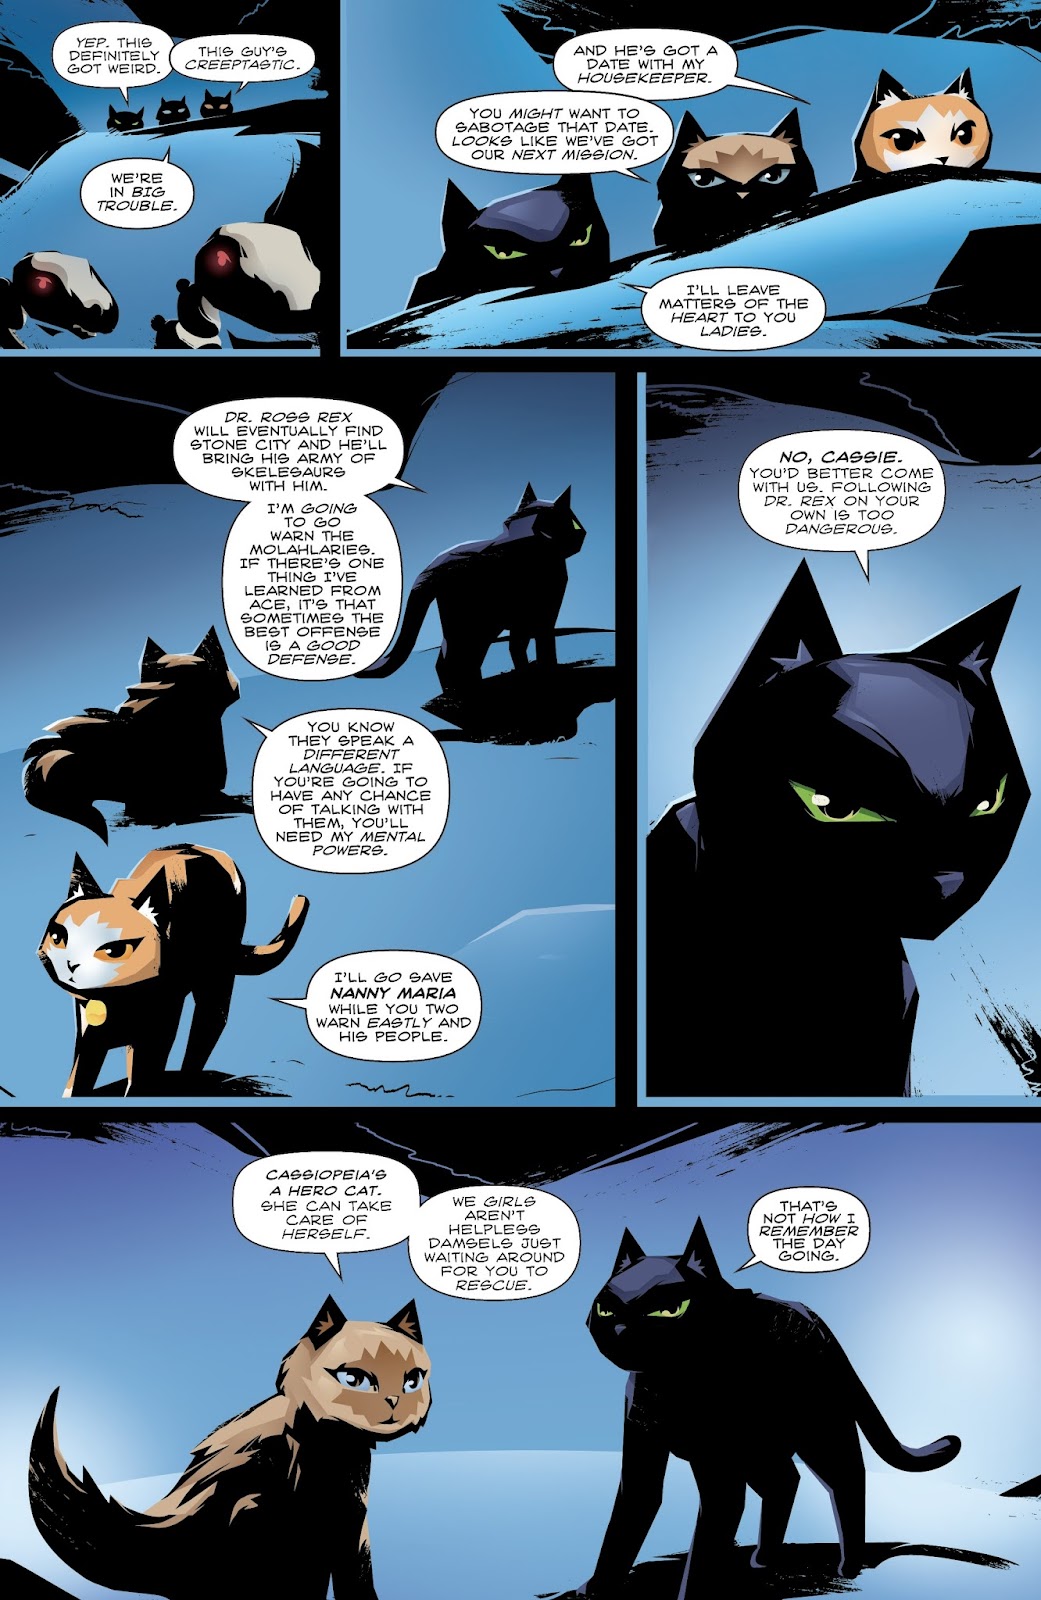 Hero Cats: Midnight Over Stellar City Vol. 2 issue 2 - Page 21